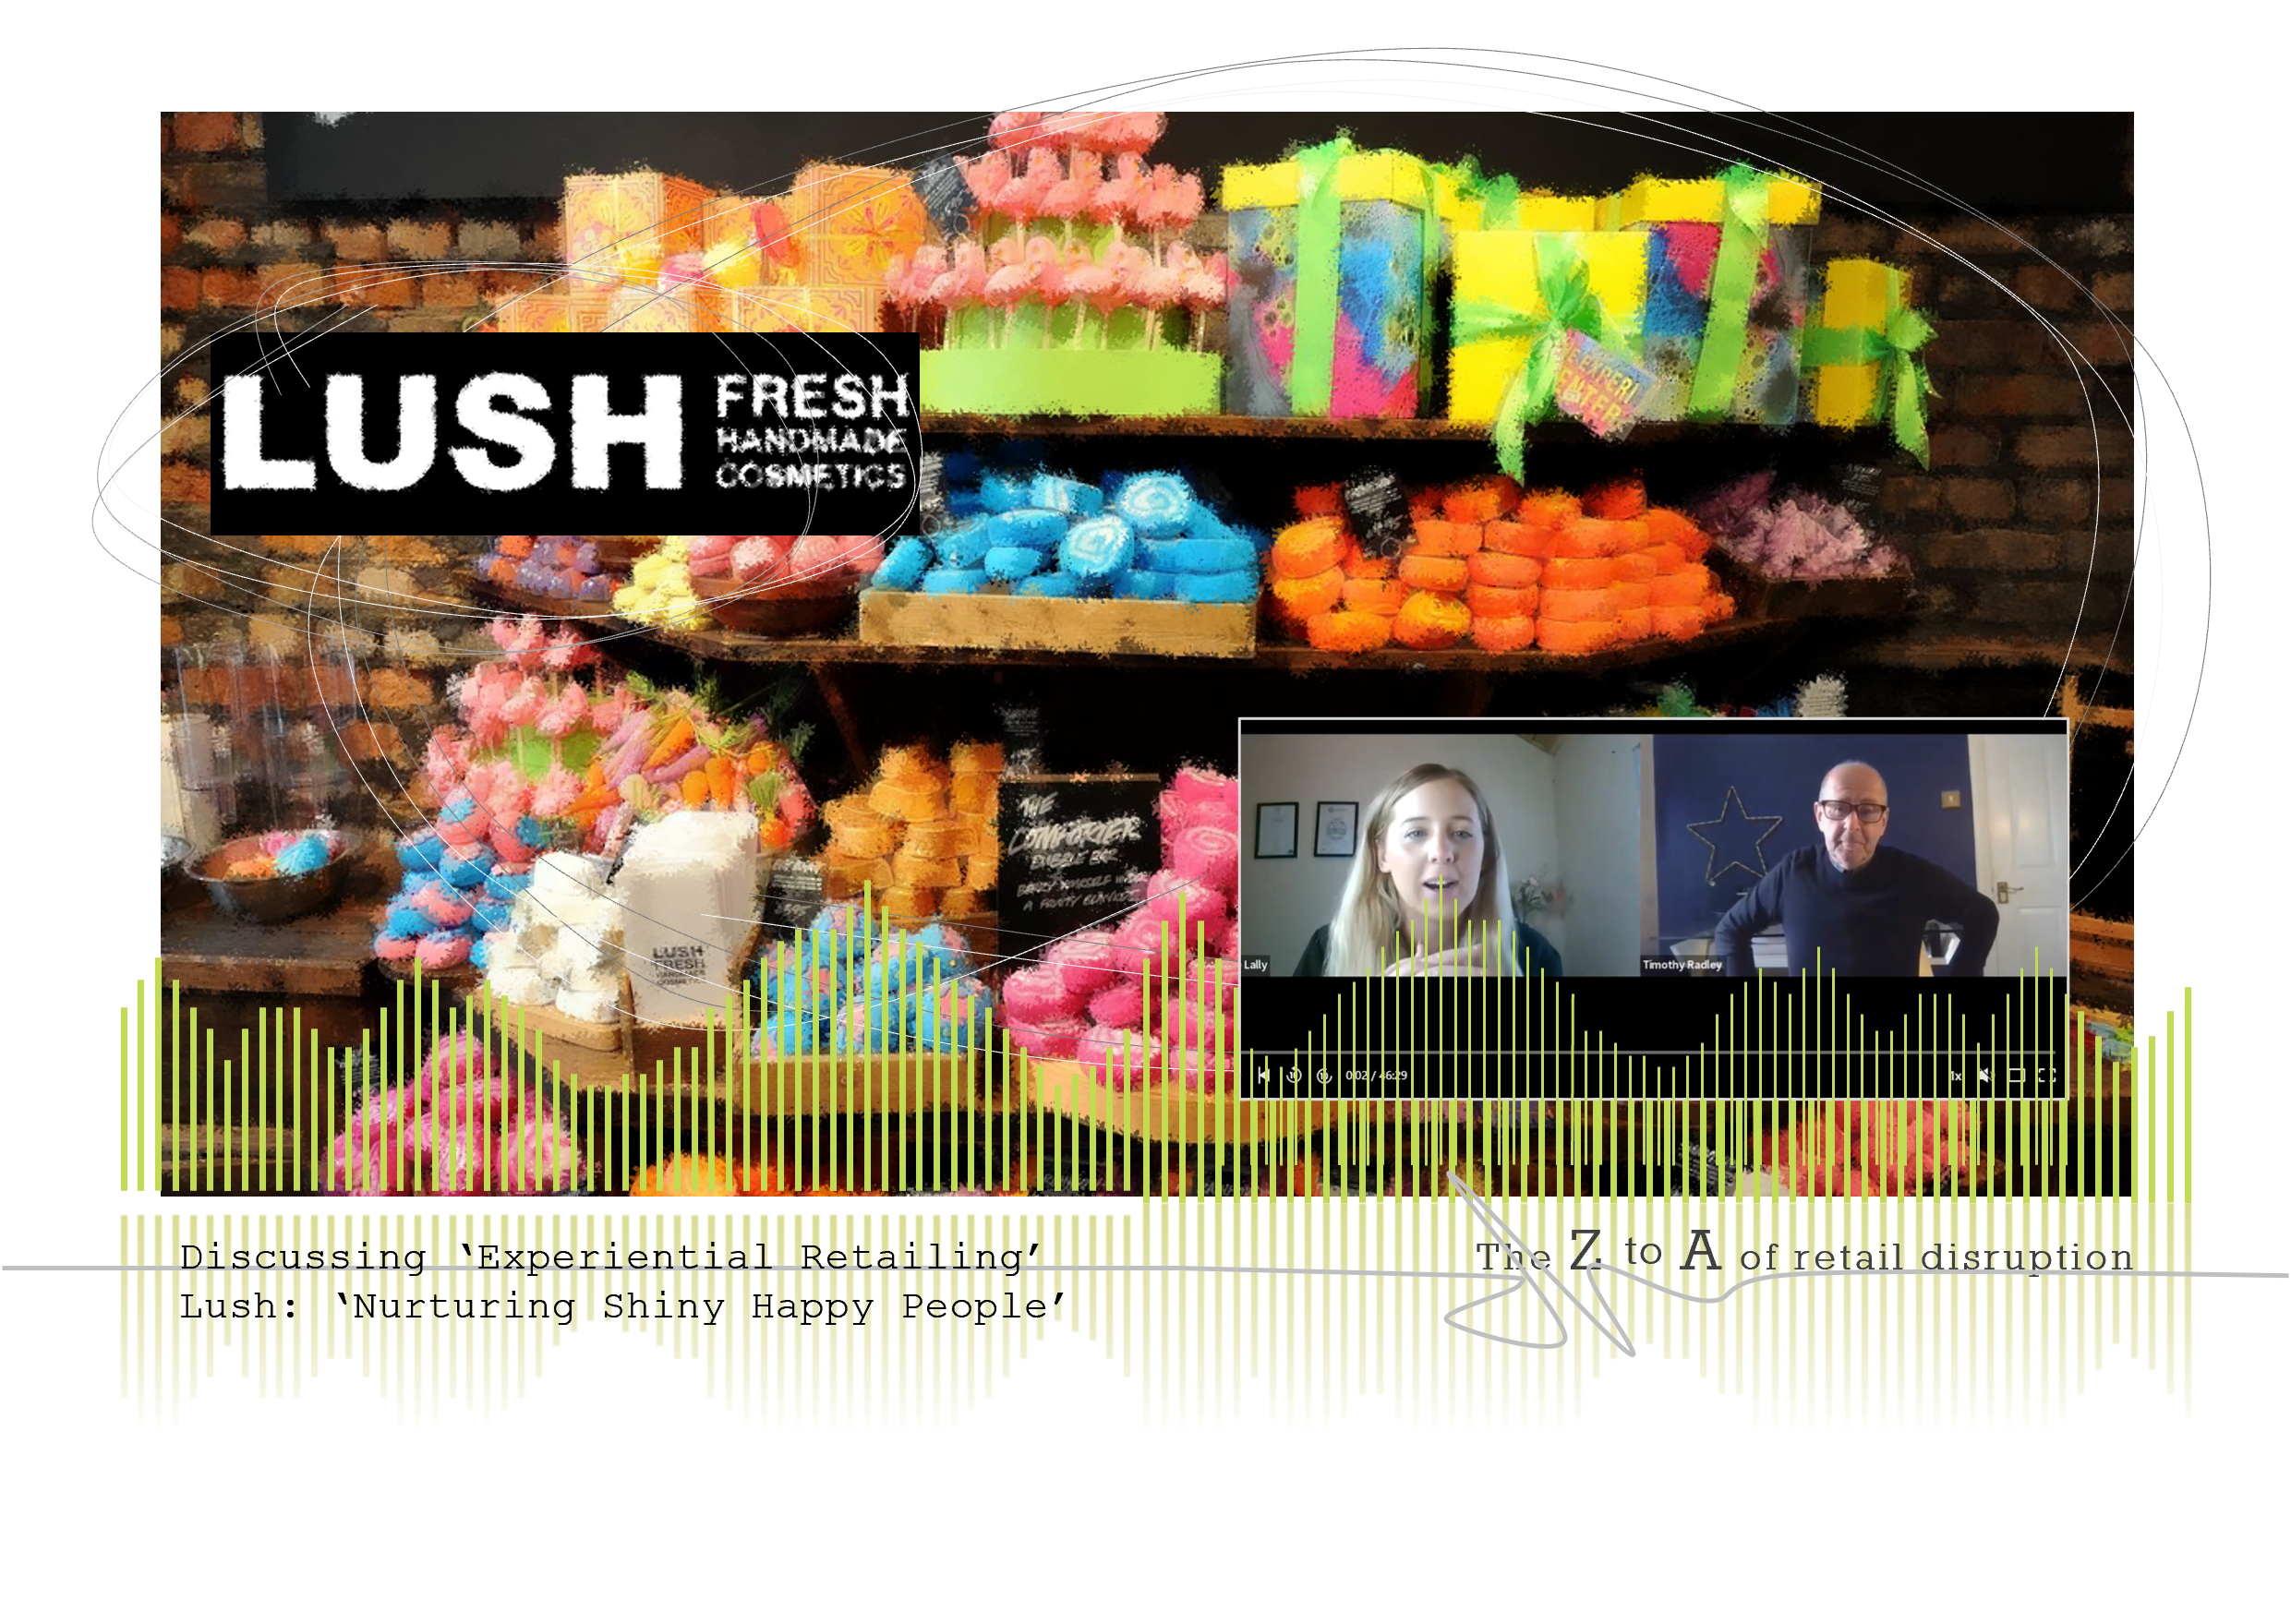 Discussing ‘Experiential Retailing’: Lush – ‘Nurturing Shiny Happy People’